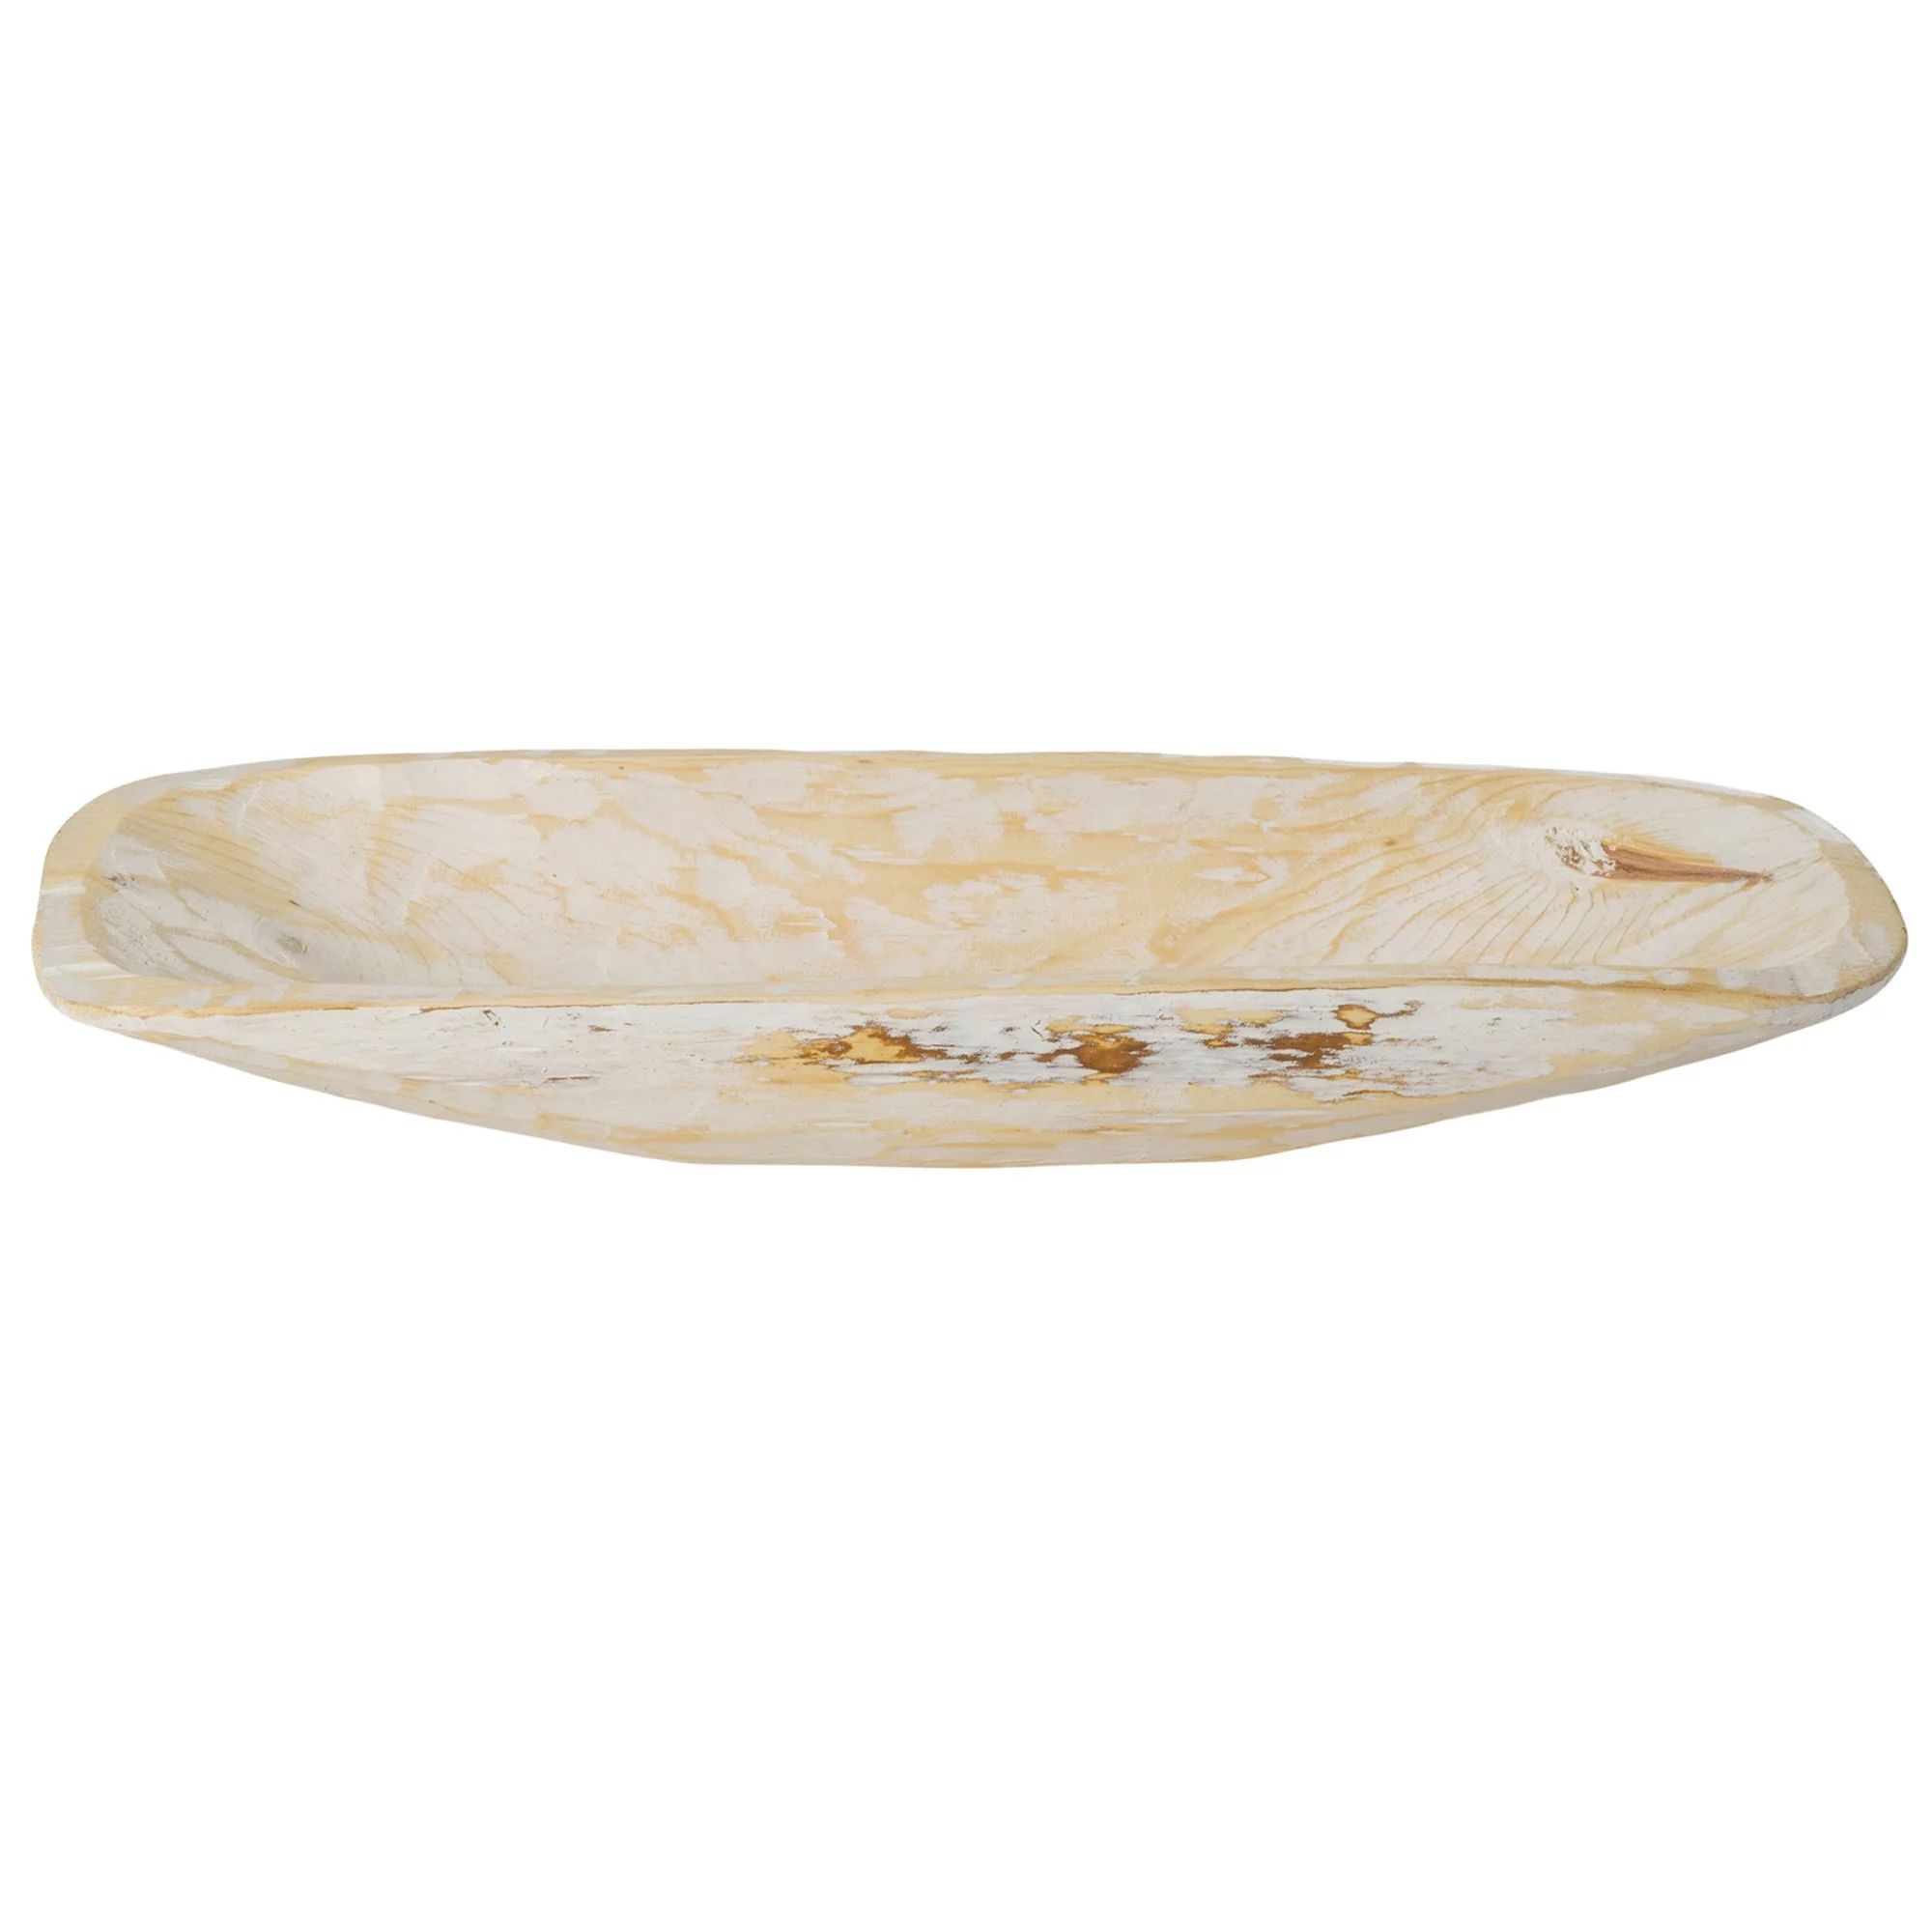 Luxury Living Furniture Solid Wood Hand-Carved Regular Decorative Bowl, White Decorative Bowl for... | Walmart (US)